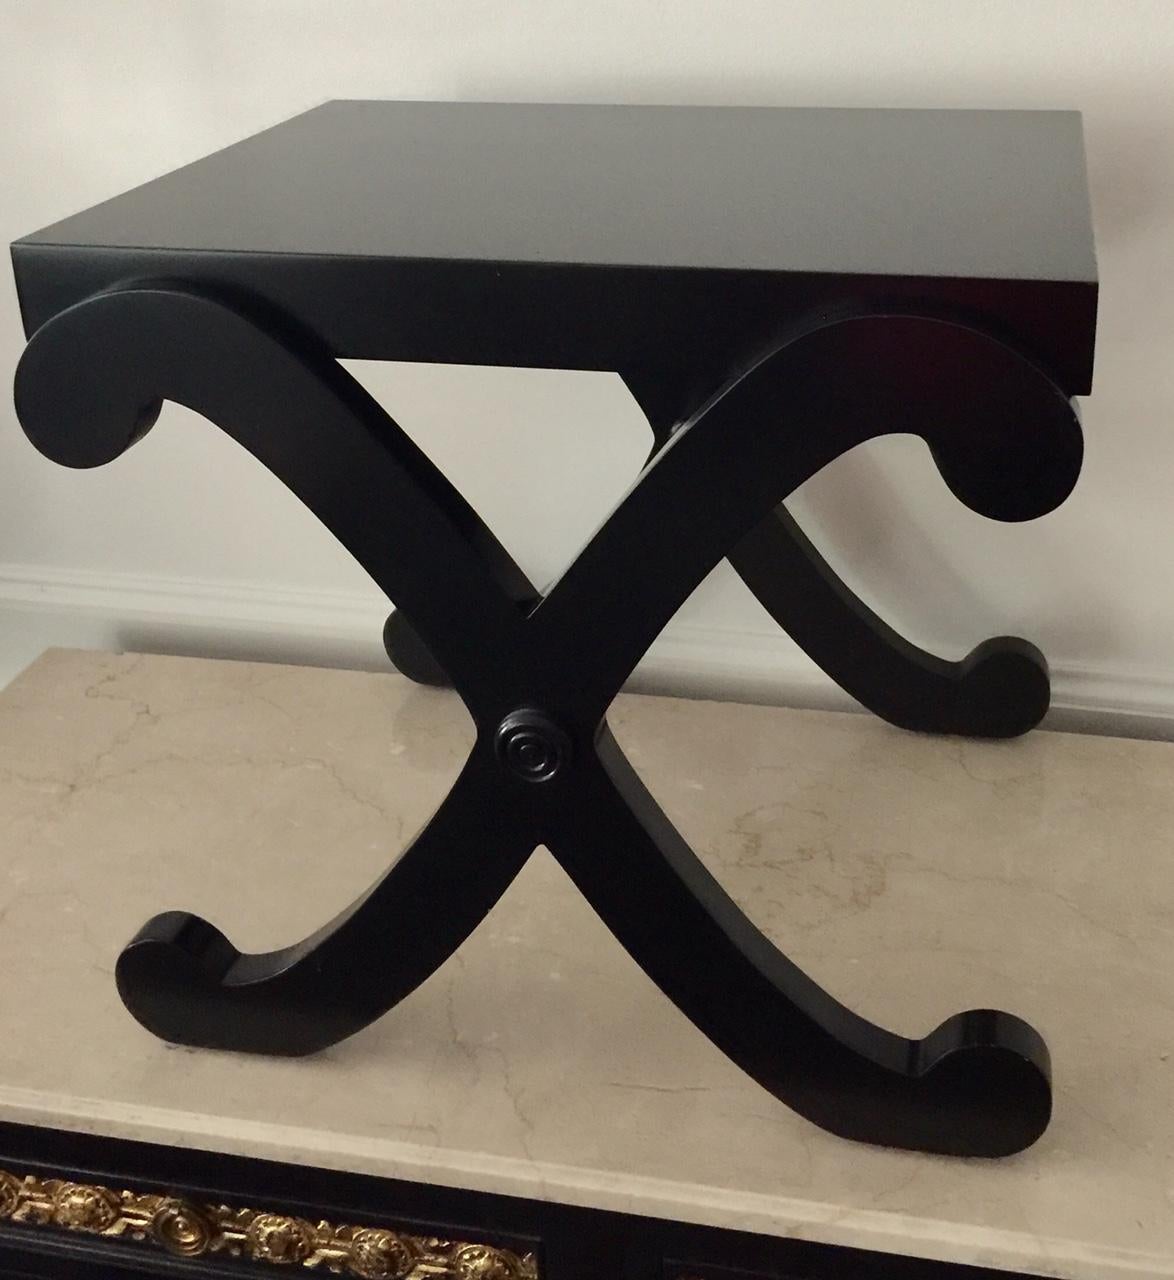 Neoclassical style black lacquered X-crossed leg table.
Lovely black lacquer side table in the chic spirit of Hollywood Regency, elegant X-legs.
Price per item. 1 available.